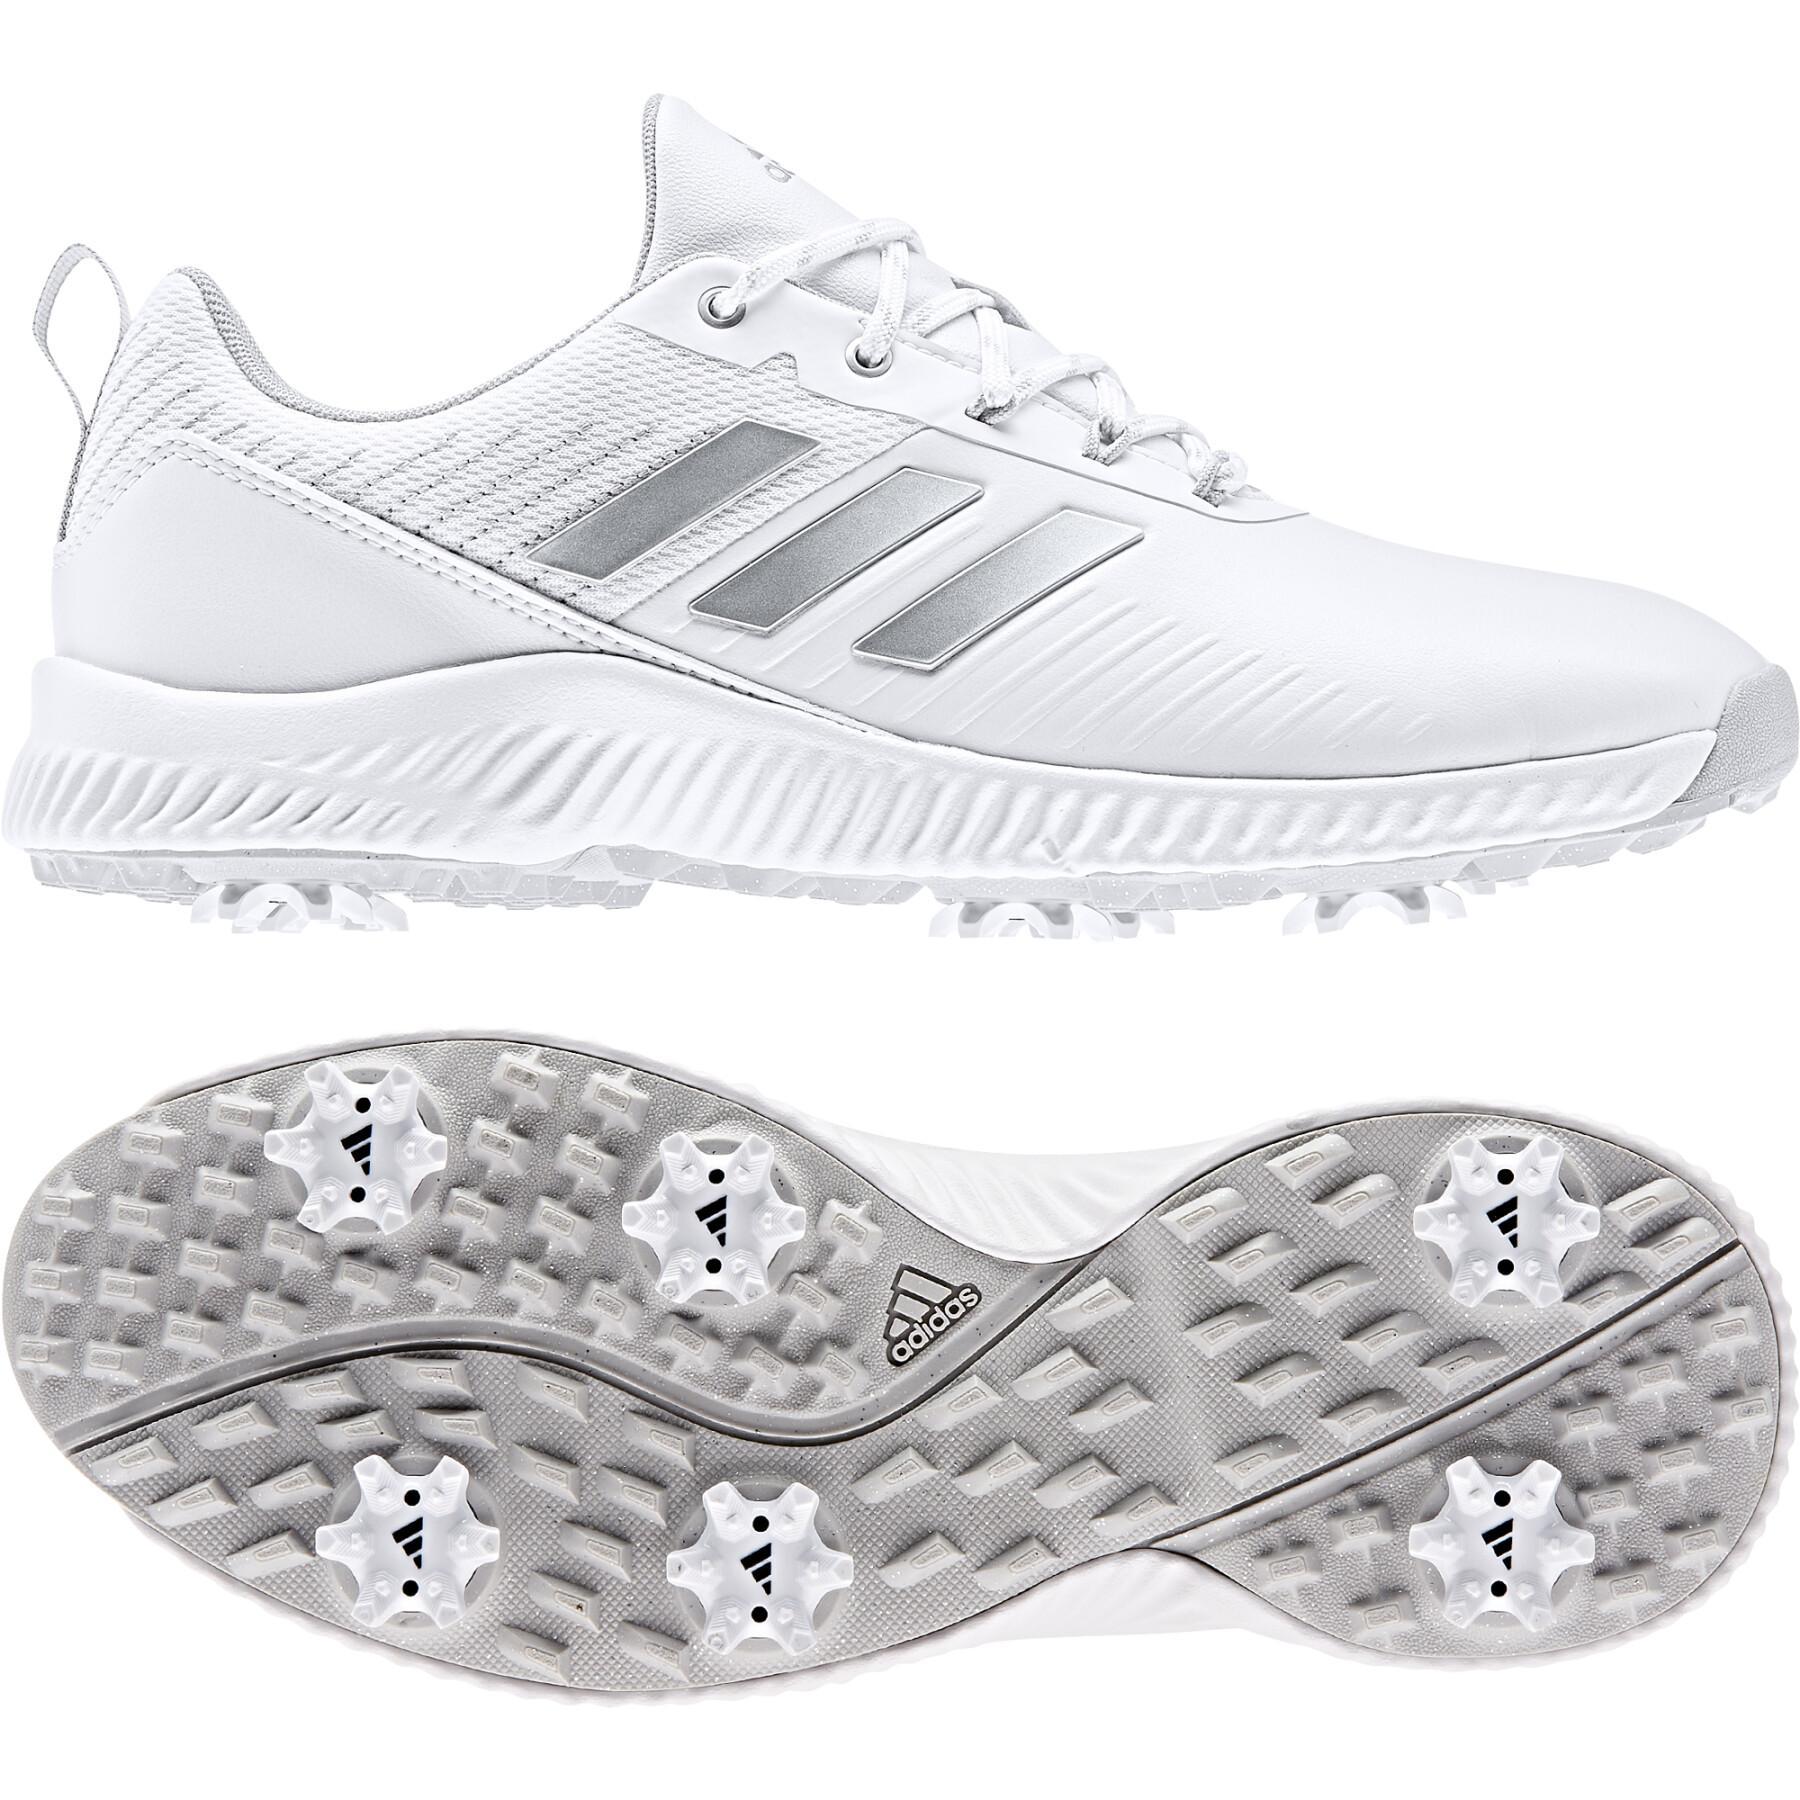 Chaussures adidas Response Bounce 2.0